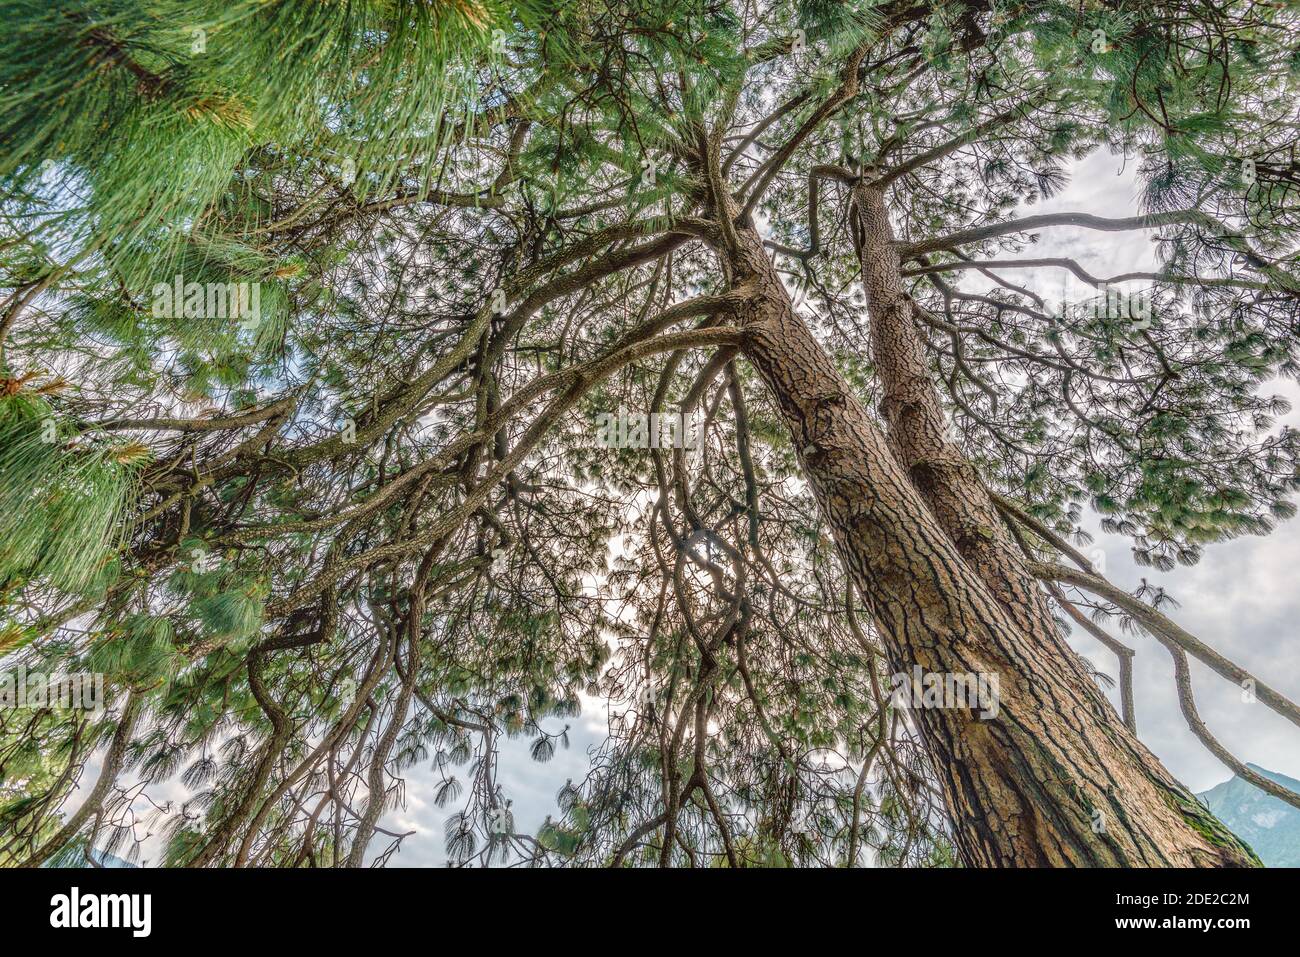 Closeup of the Pinus devoniana (Michoacan Pine) is a species of conifer in the Pinaceae family at the Garden of Villa Melzi, Bellagio, Italy Stock Photo